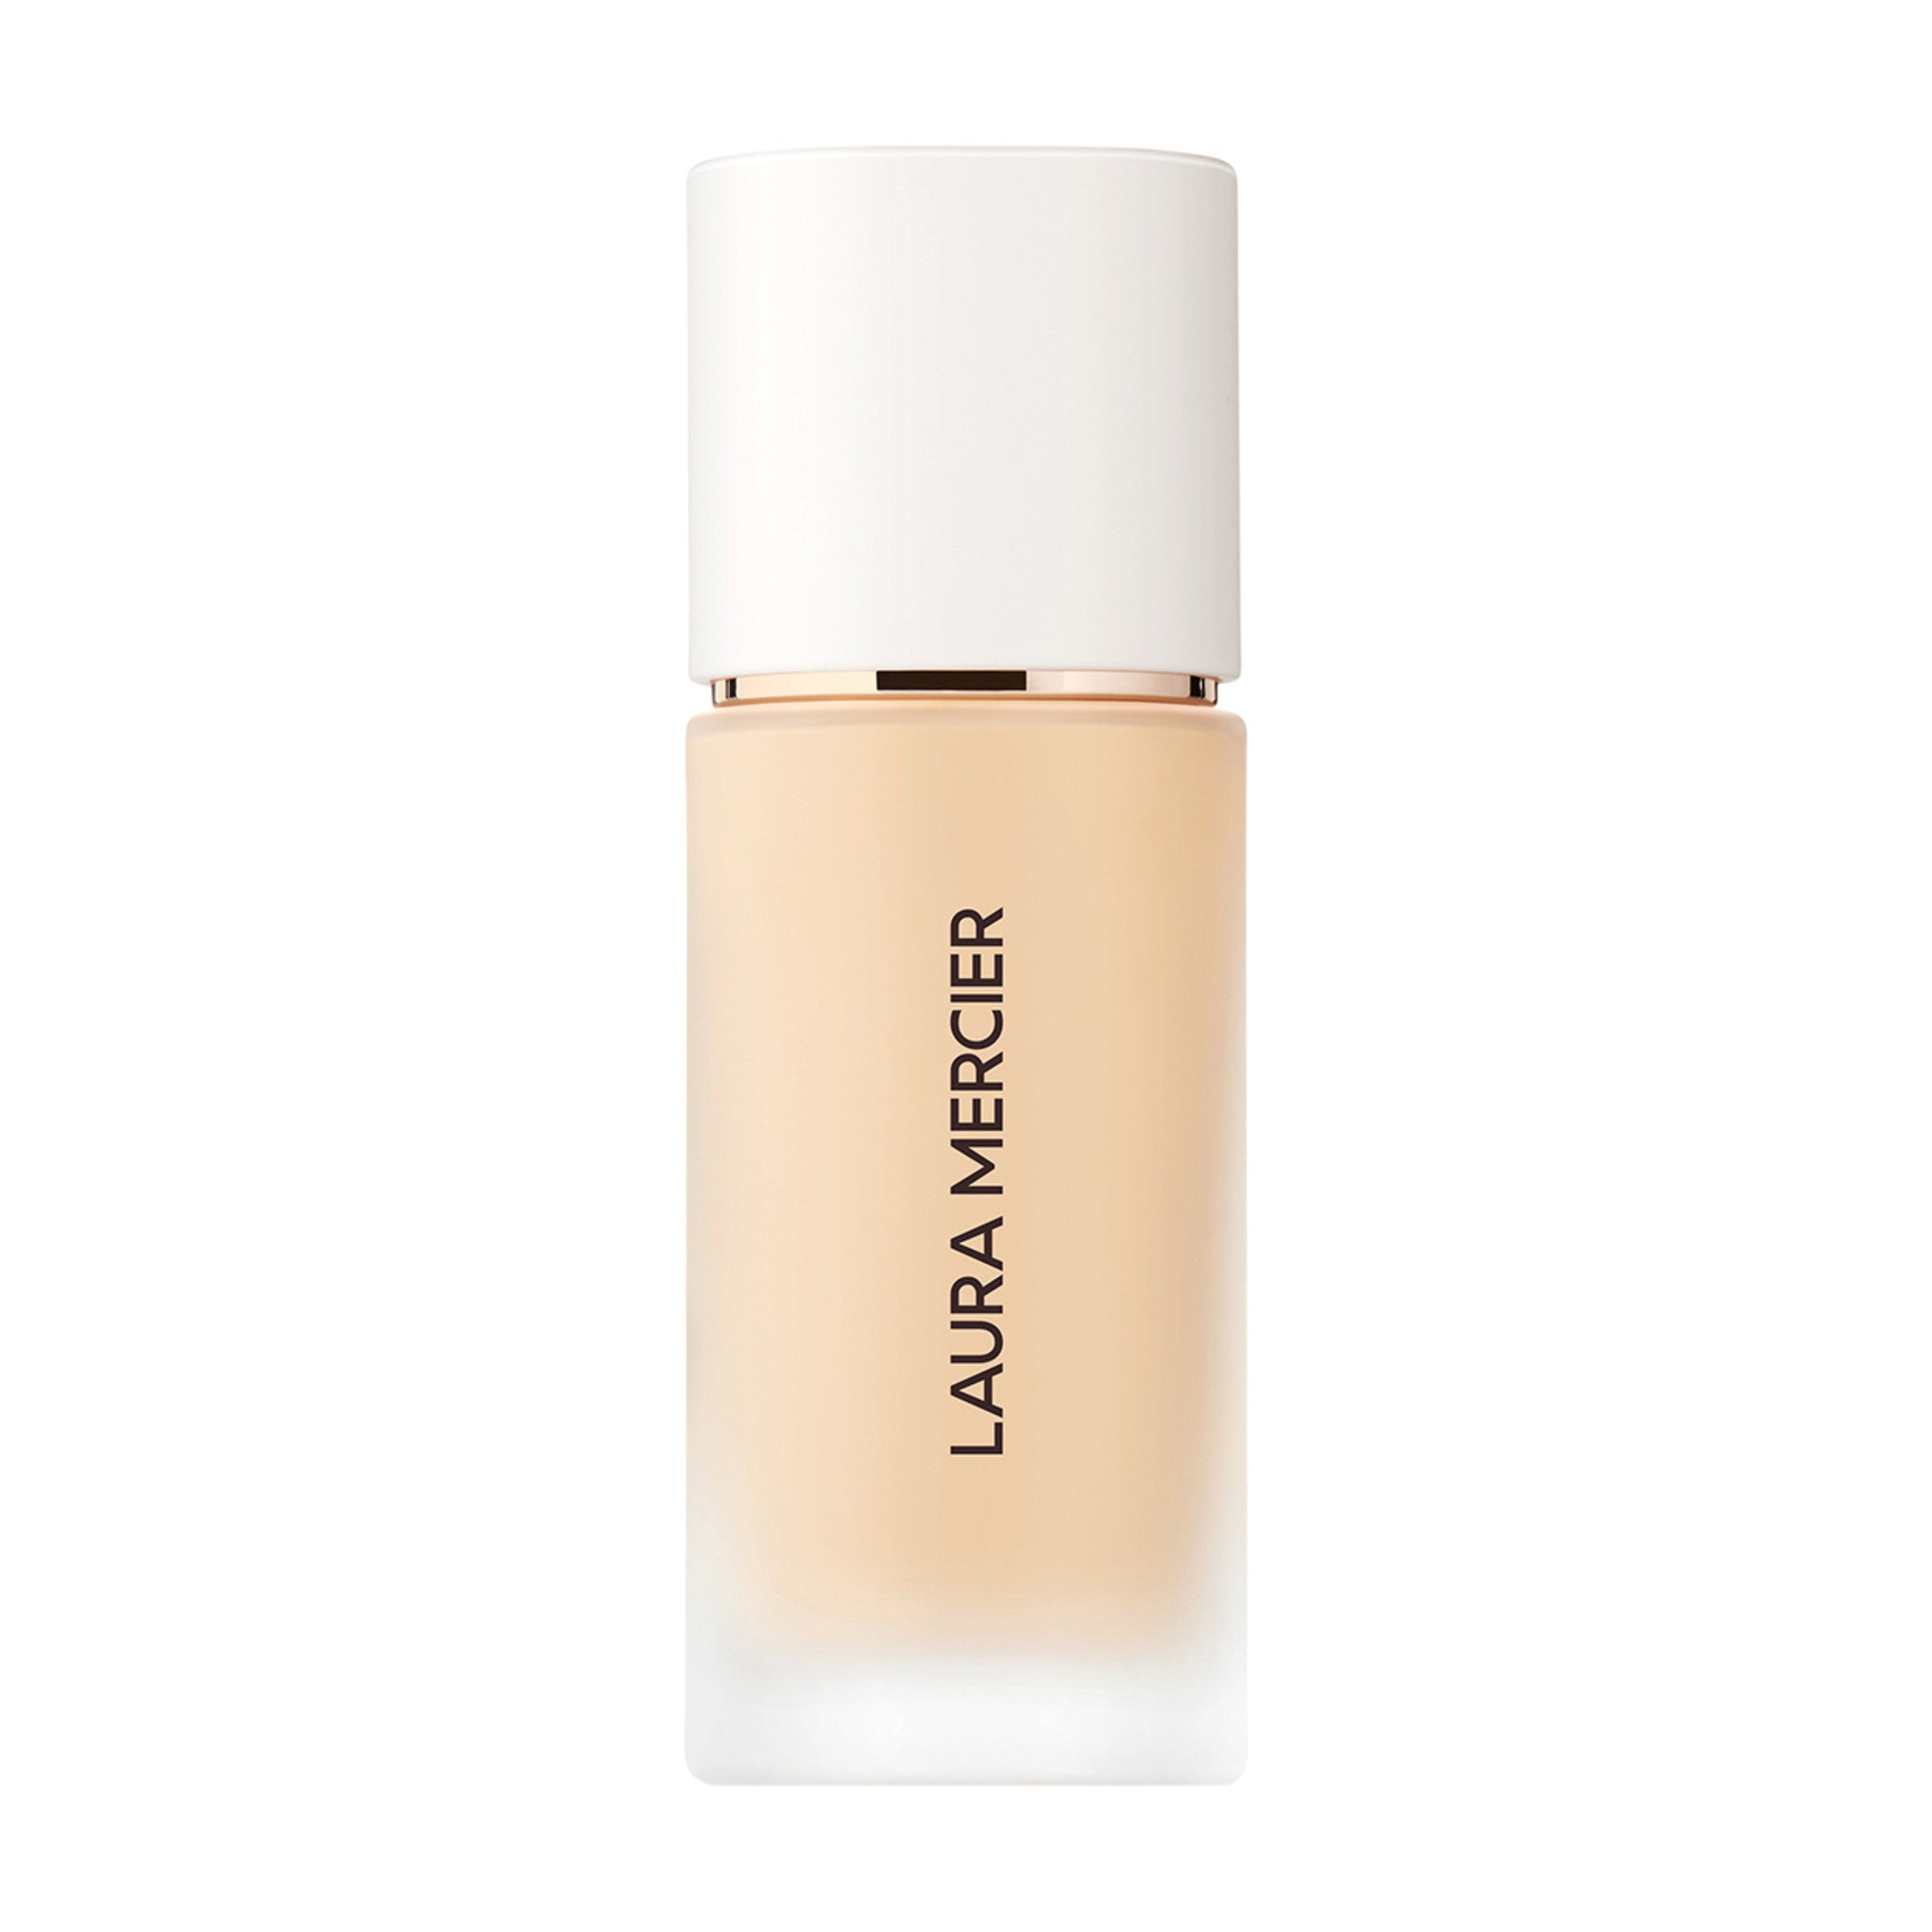 Laura Mercier Real Flawless Weightless Perfecting Foundation Color/Shade variant: 0W1 Satin main image.